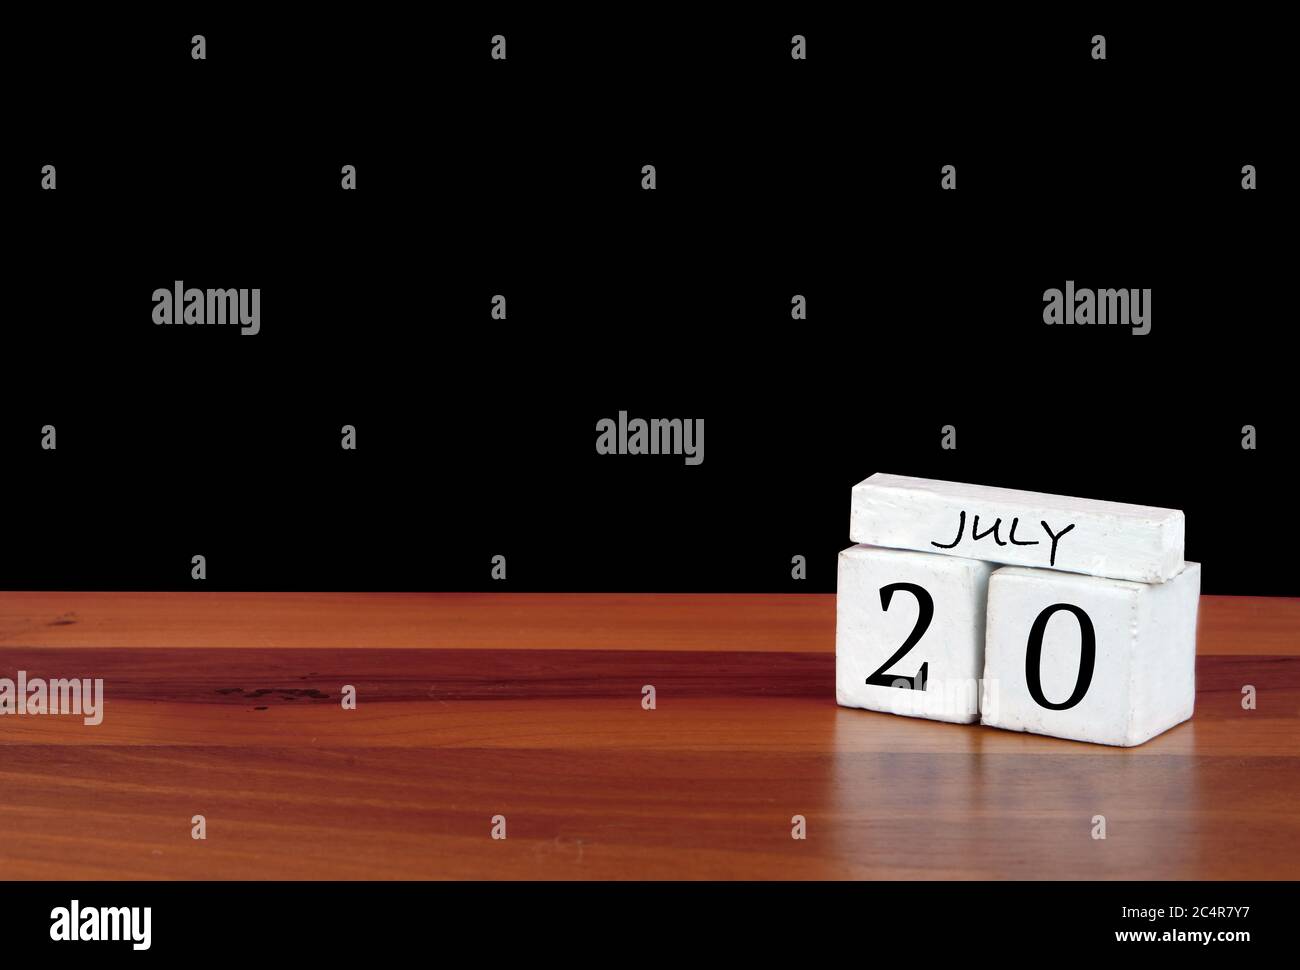 20 July calendar month. 20 days of the month. Reflected calendar on wooden floor with black background Stock Photo